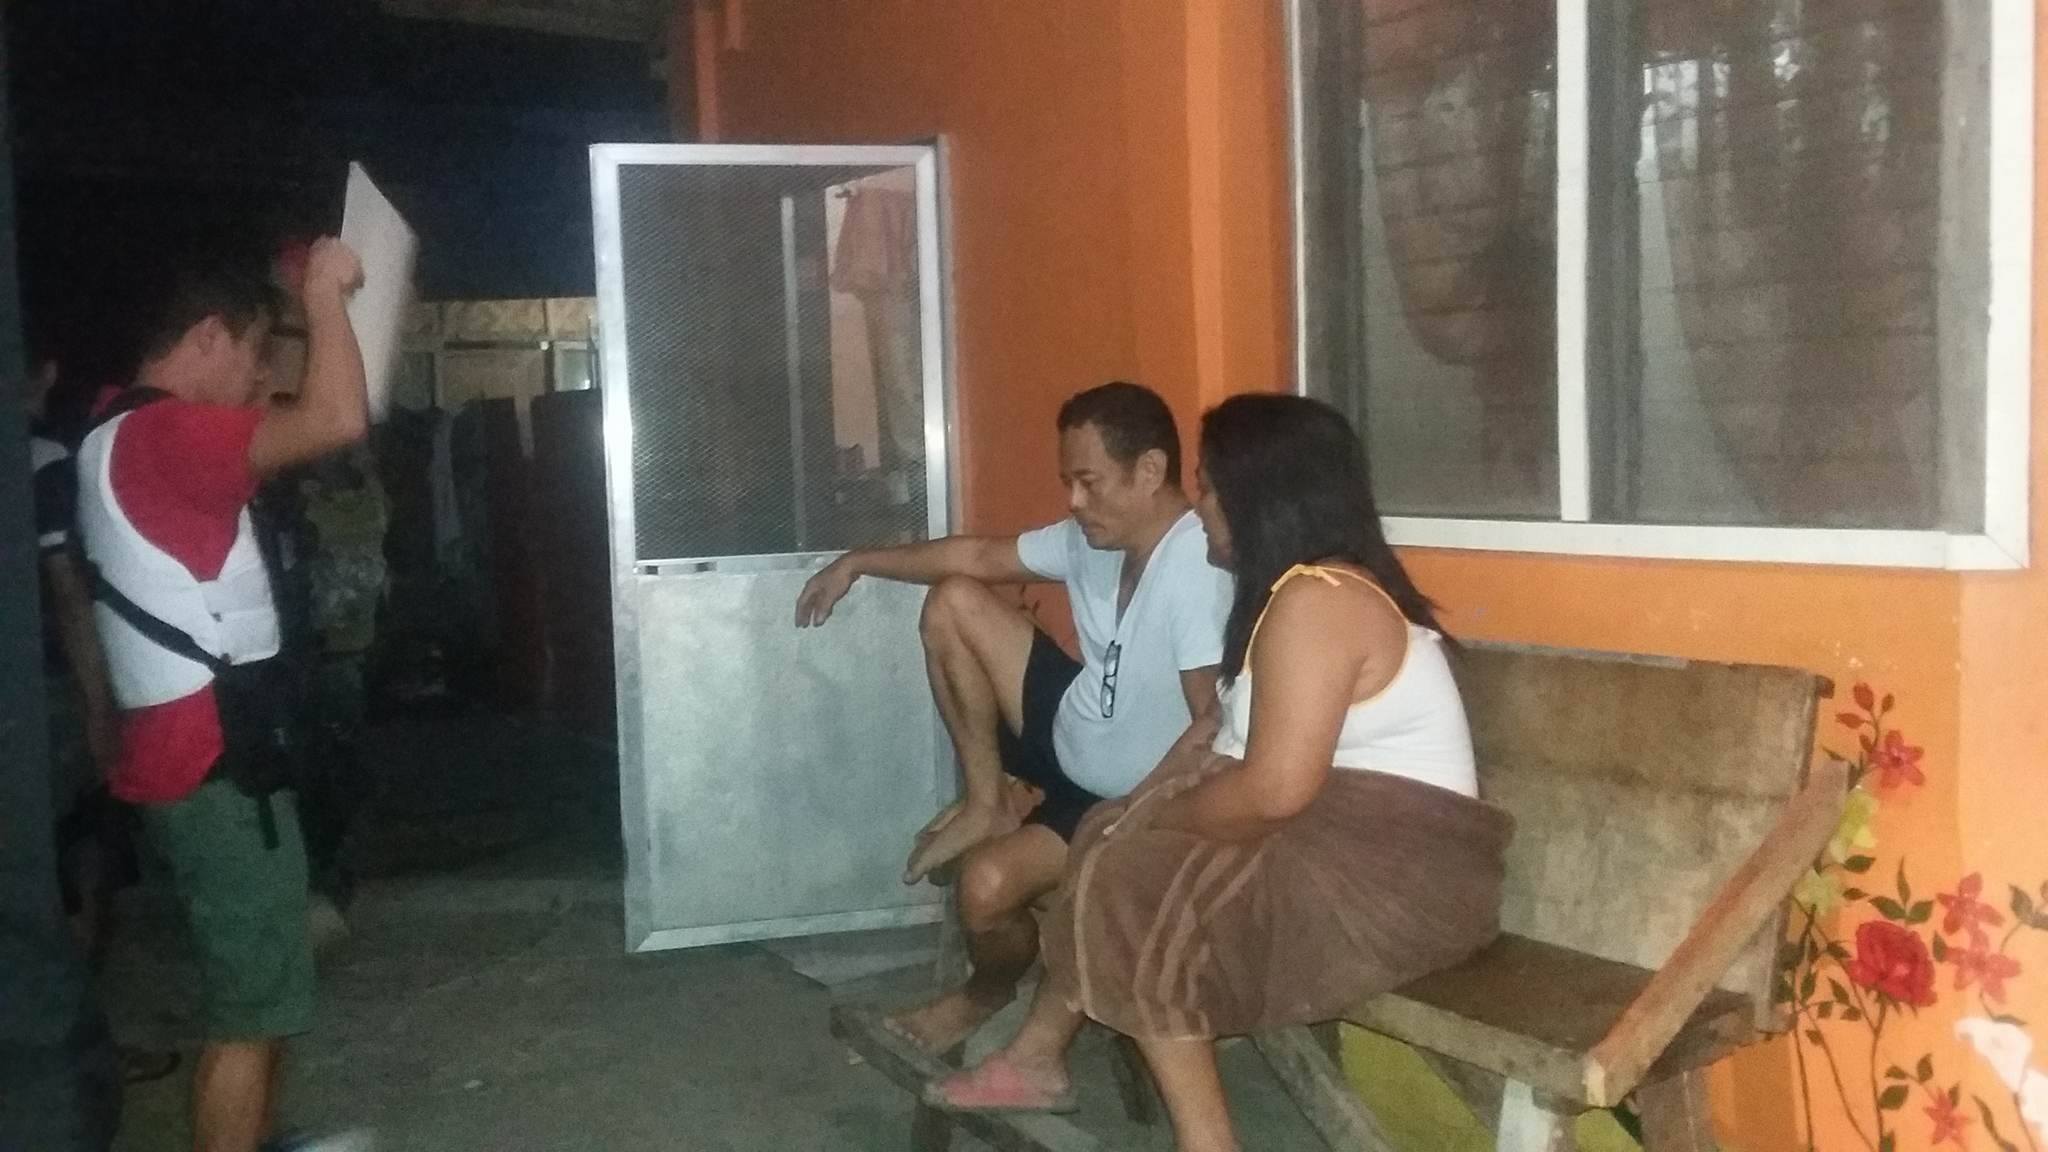 Operatives from the Cebu Provincial Police Office  raided the house of police couple on Sibonga town, early morning Tuesday. (CDN PHOTO/ BENJIE TALISIC)